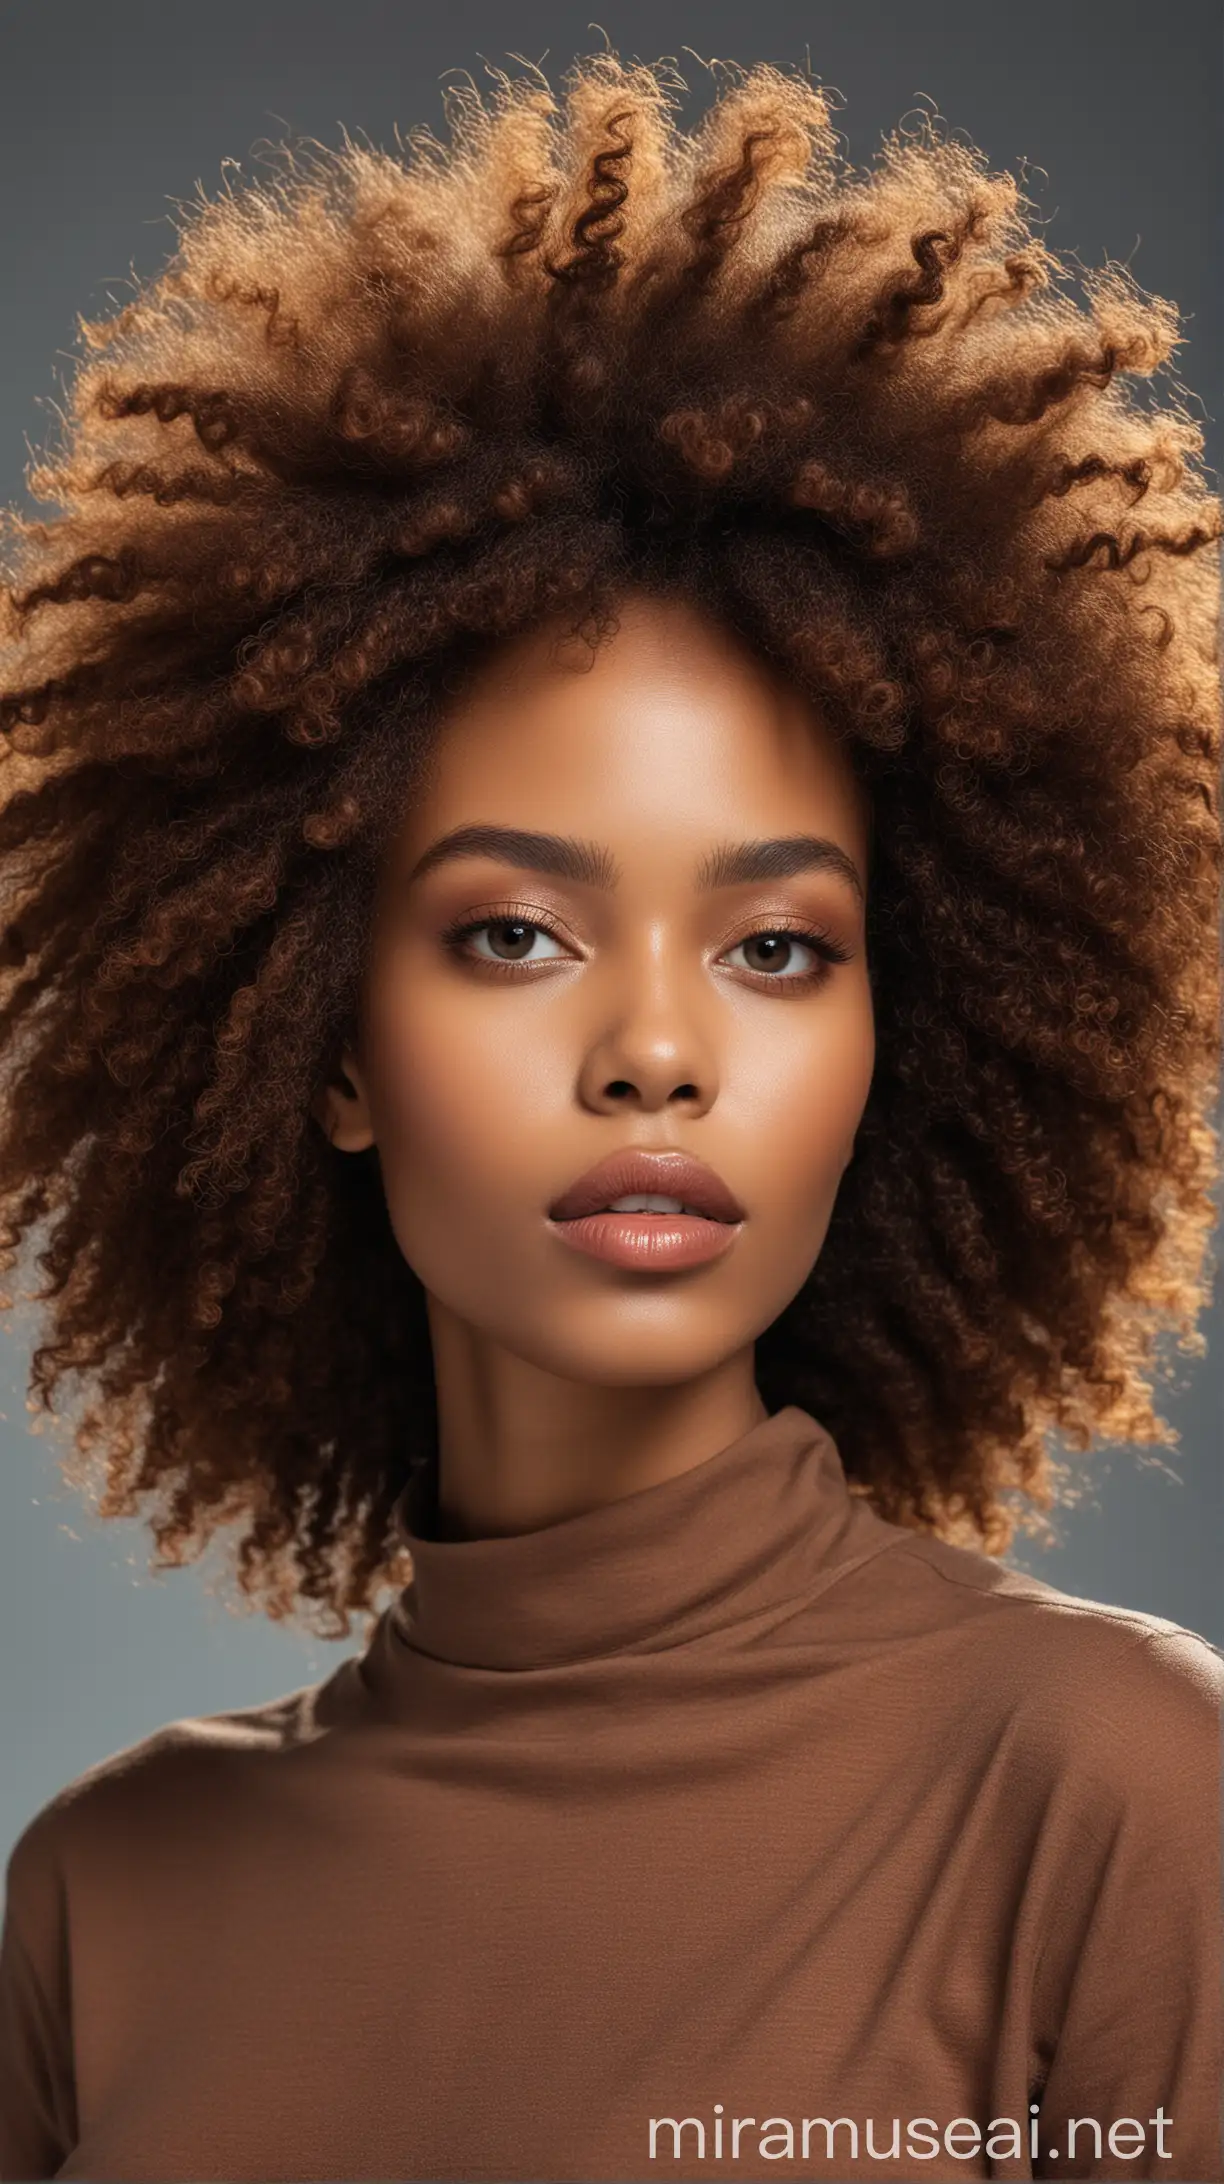 Spectacular Model with Healthy Afro Hair in Vibrant Urban Setting